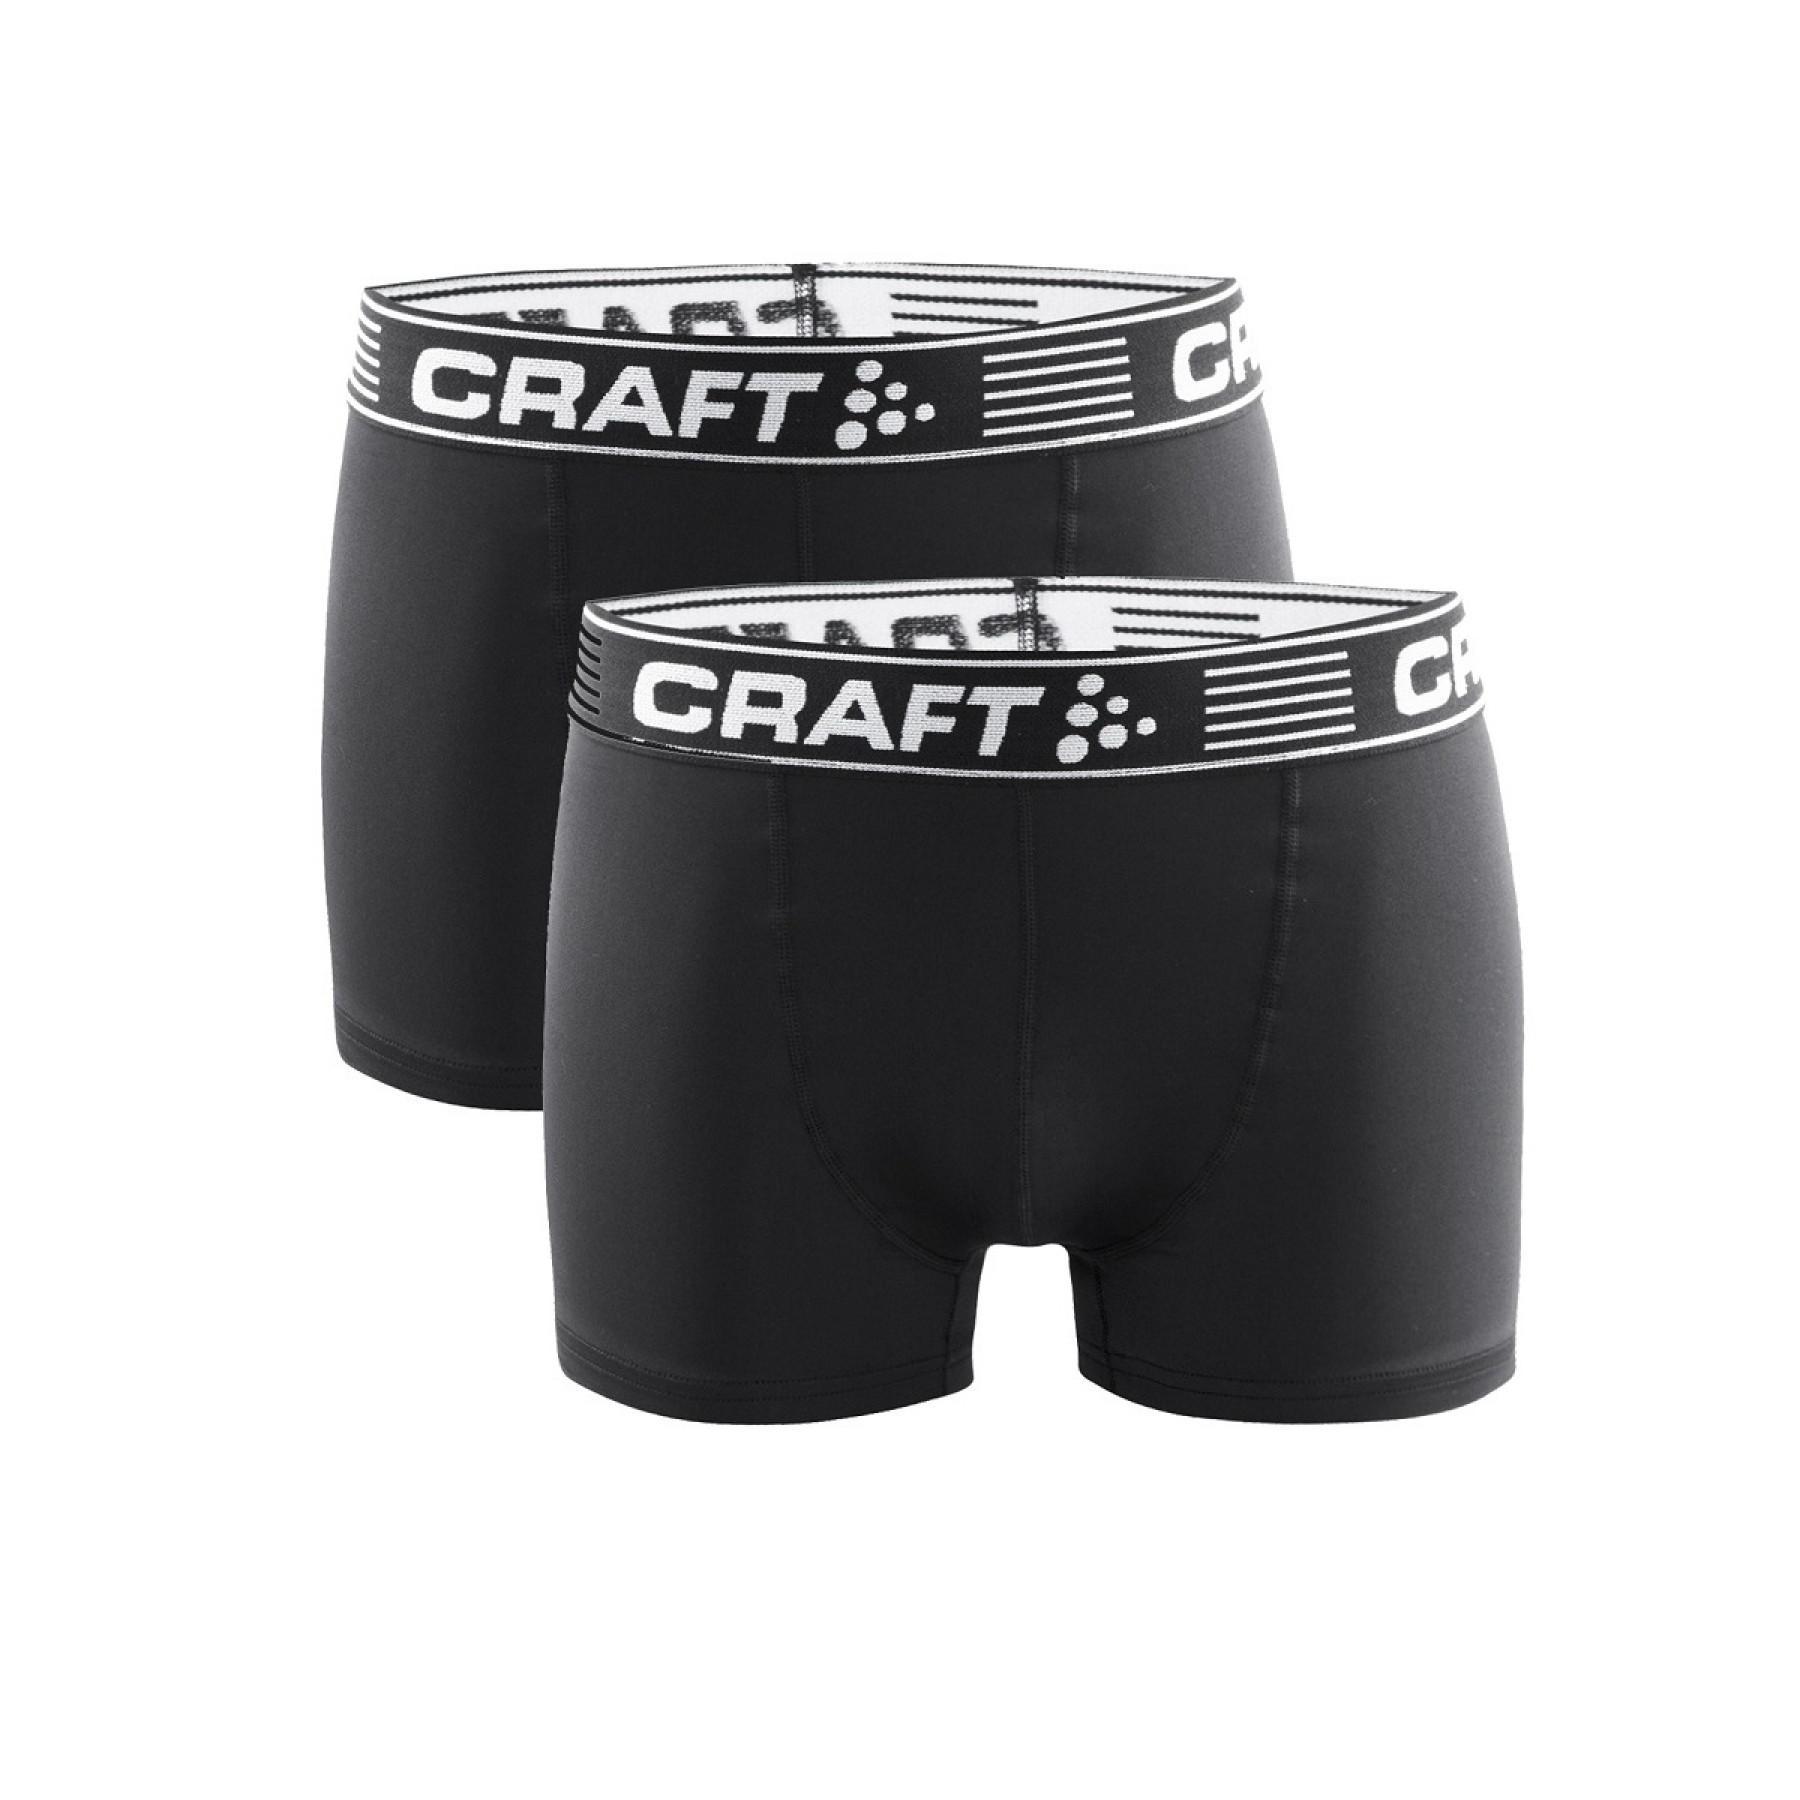 Set of 2 3-inch boxers Craft greatness